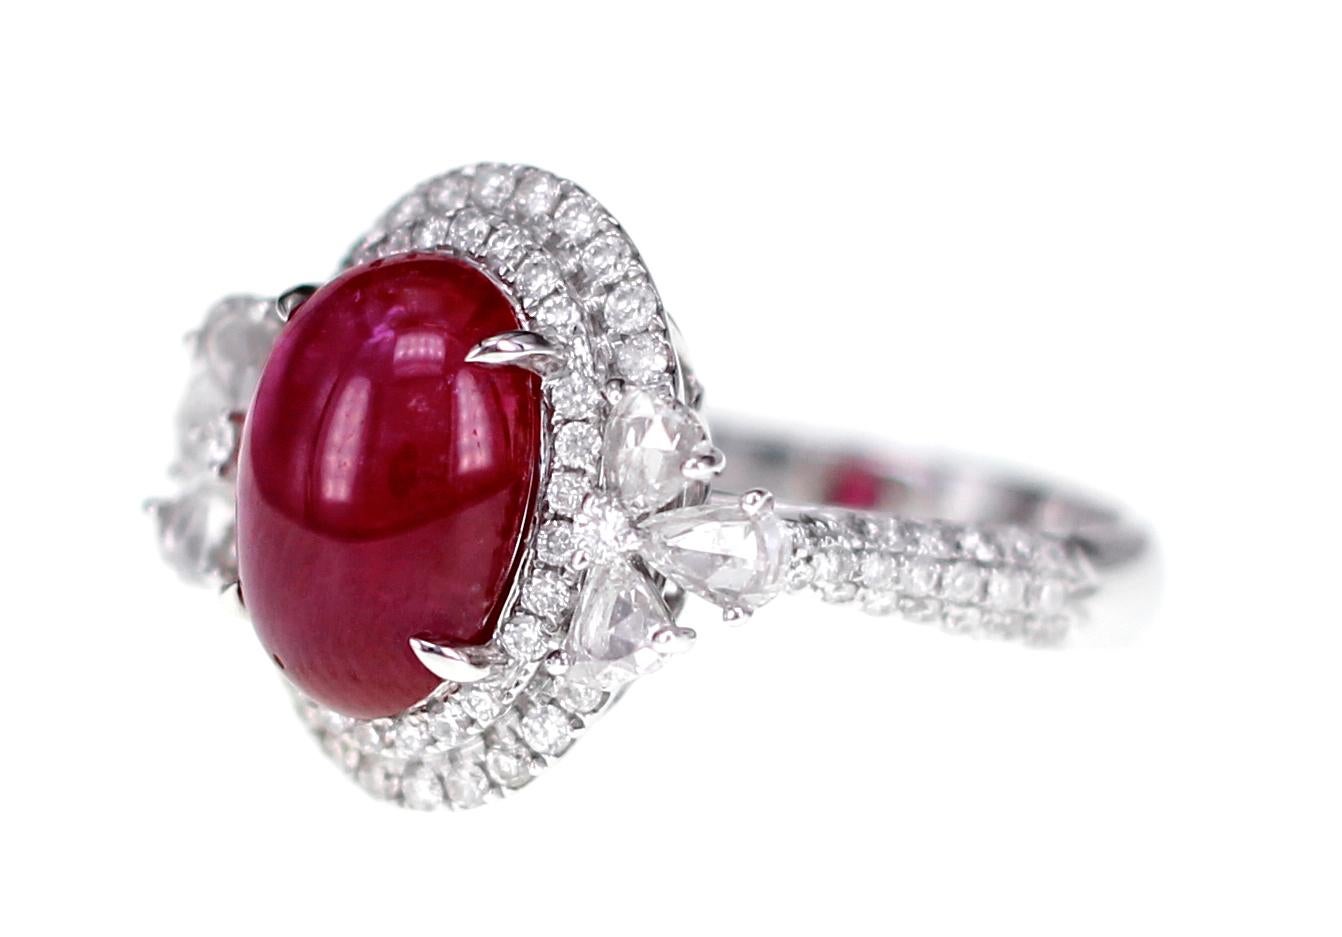 4.50 Carat Ruby with One Carat White Brilliant Diamond For Sale at ...